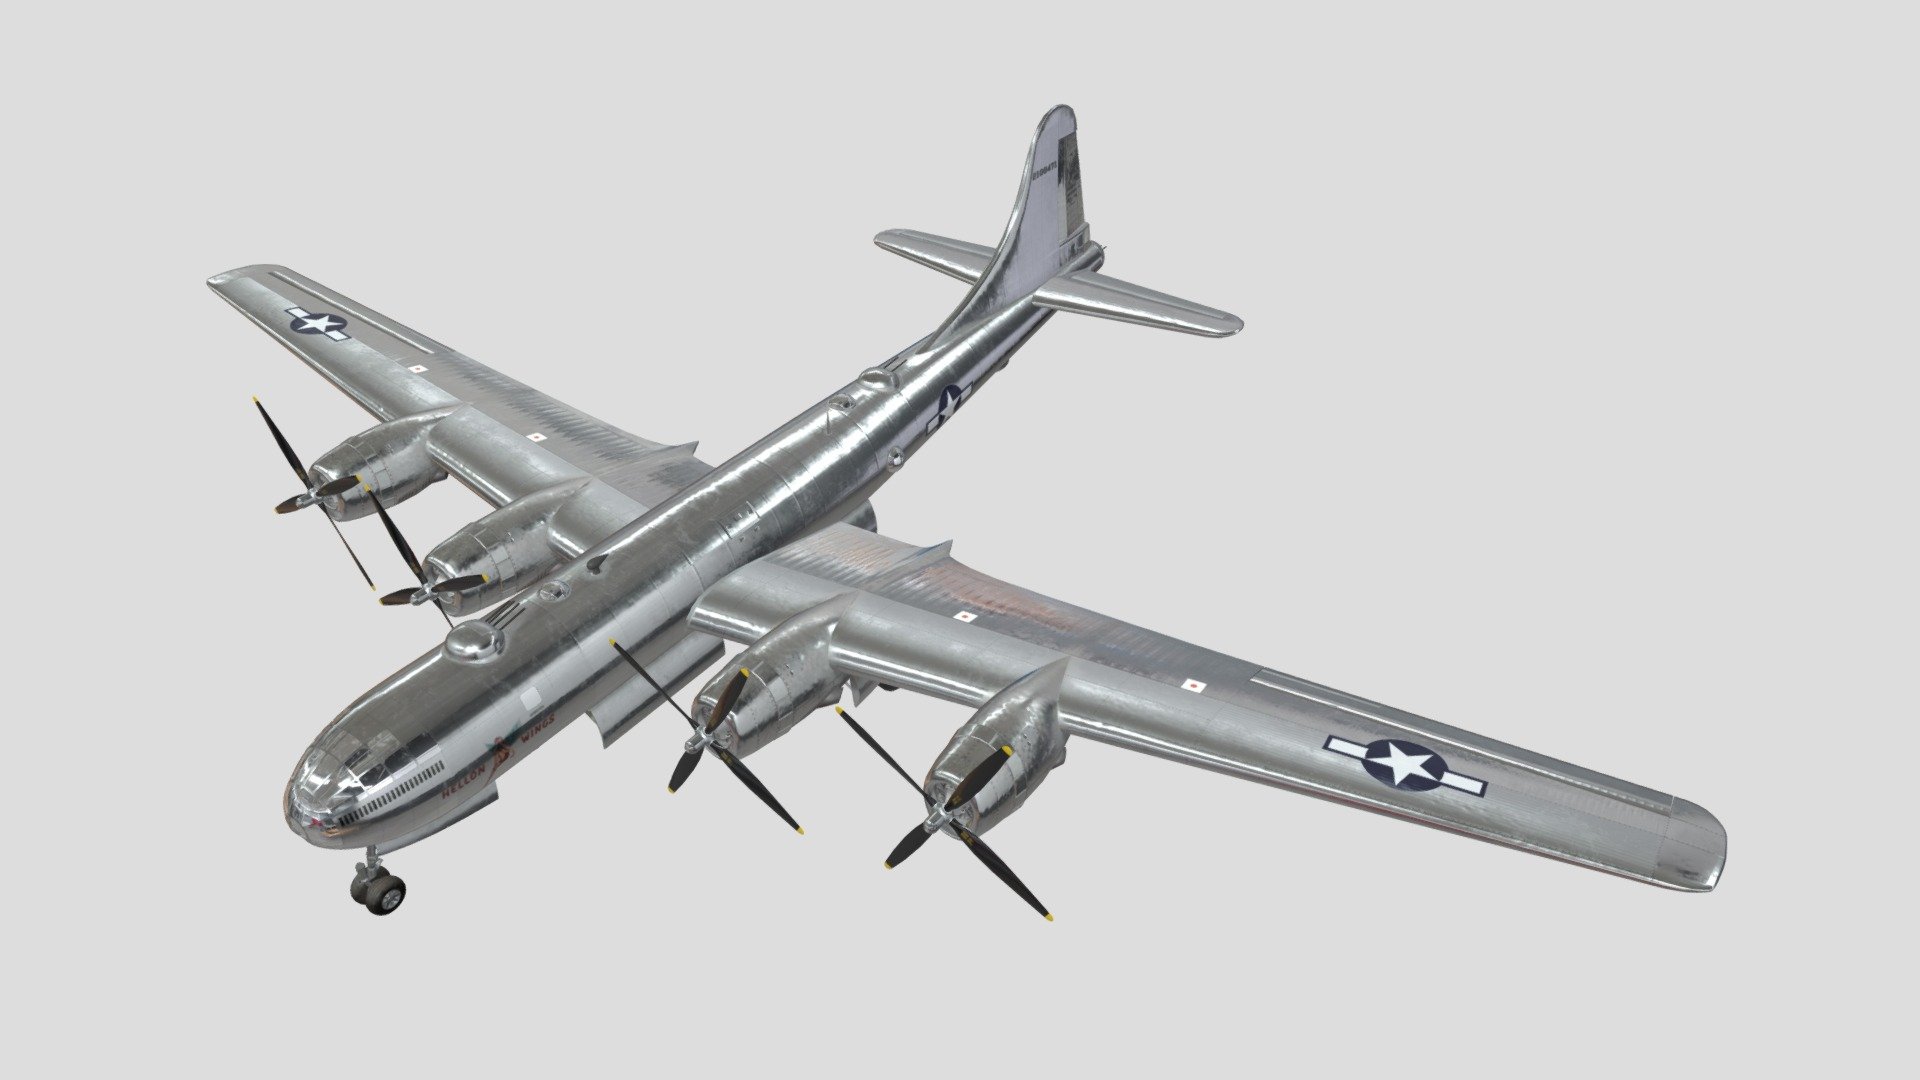 It is an American propeller-type strategic bomber. The B-29 bomber has a straight-wing four-engine aerodynamic layout. Its name is inherited from the B-17 bomber. It was the main bomber of the U.S. Army Air Force in the Asian battlefield of World War II. It was also the largest aircraft among the air forces of various countries at that time. The aircraft is mainly used to perform strategic bombing and long-range bombing missions. It can also be used as an anti-submarine, reconnaissance and aerial tanker. It used the advanced technology of the time and was known as the &ldquo;Super Sky Fortress